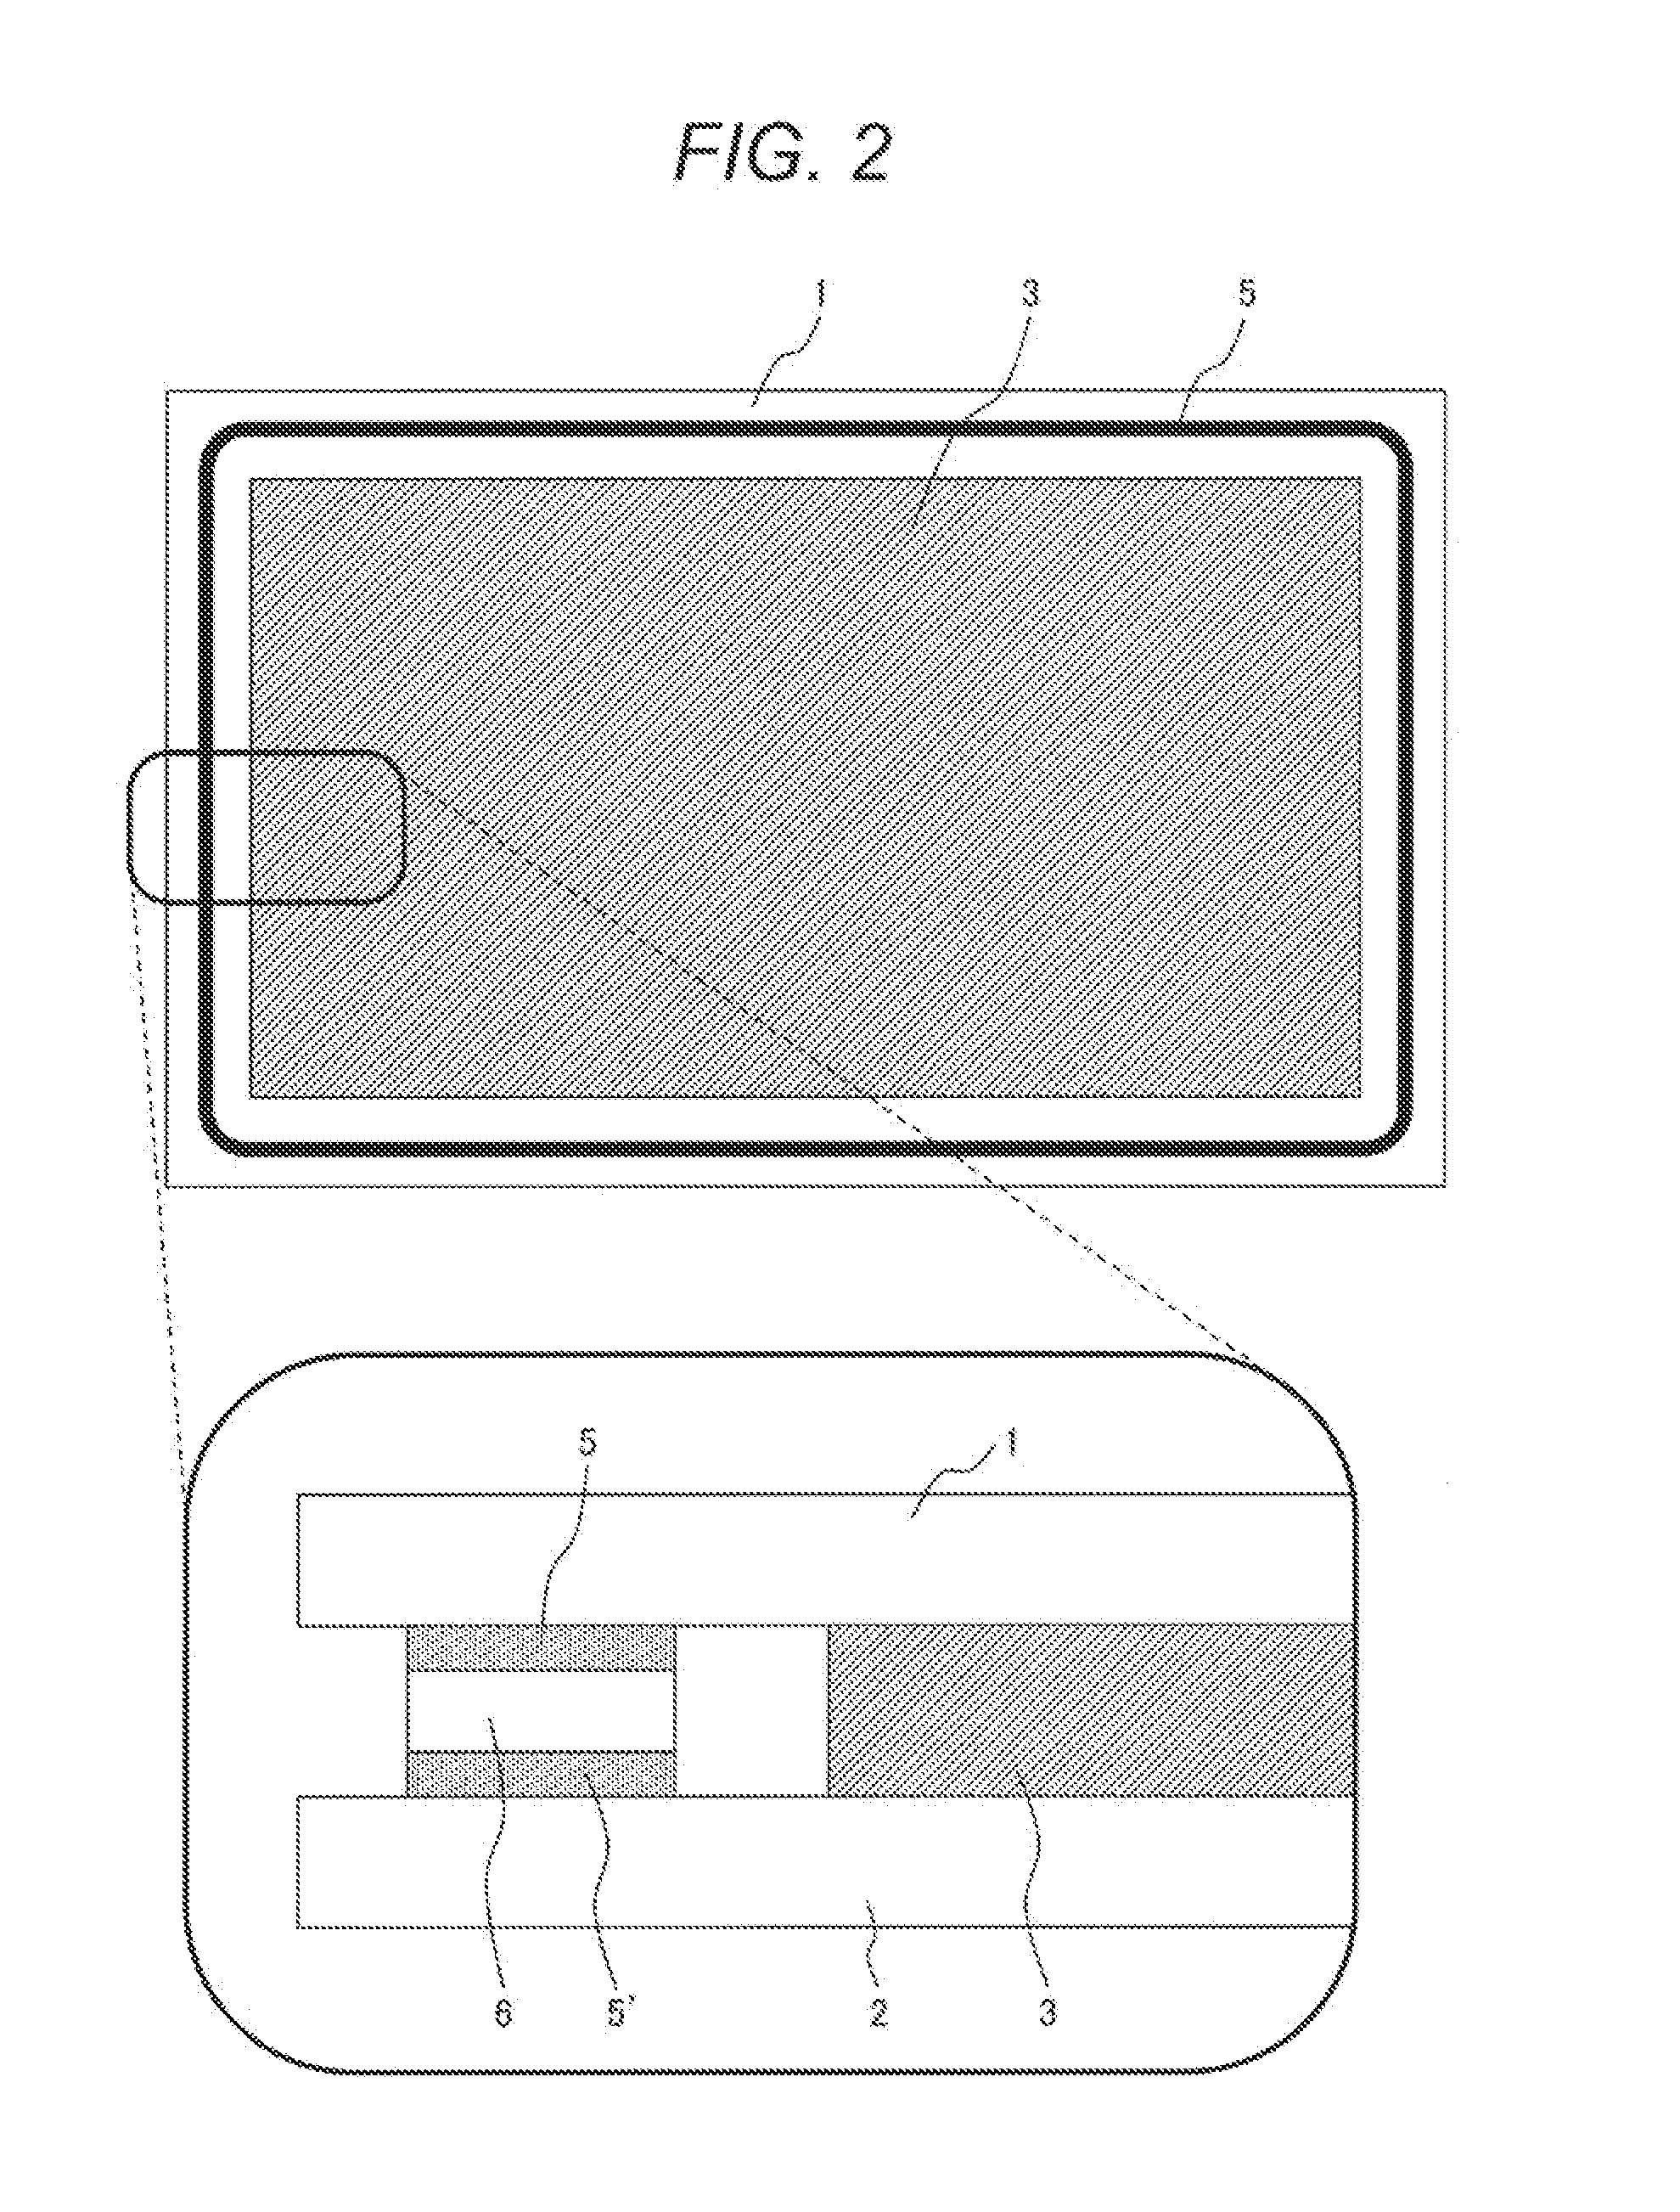 Electronic Component, Method for Producing Same, and Sealing Material Paste Used in Same